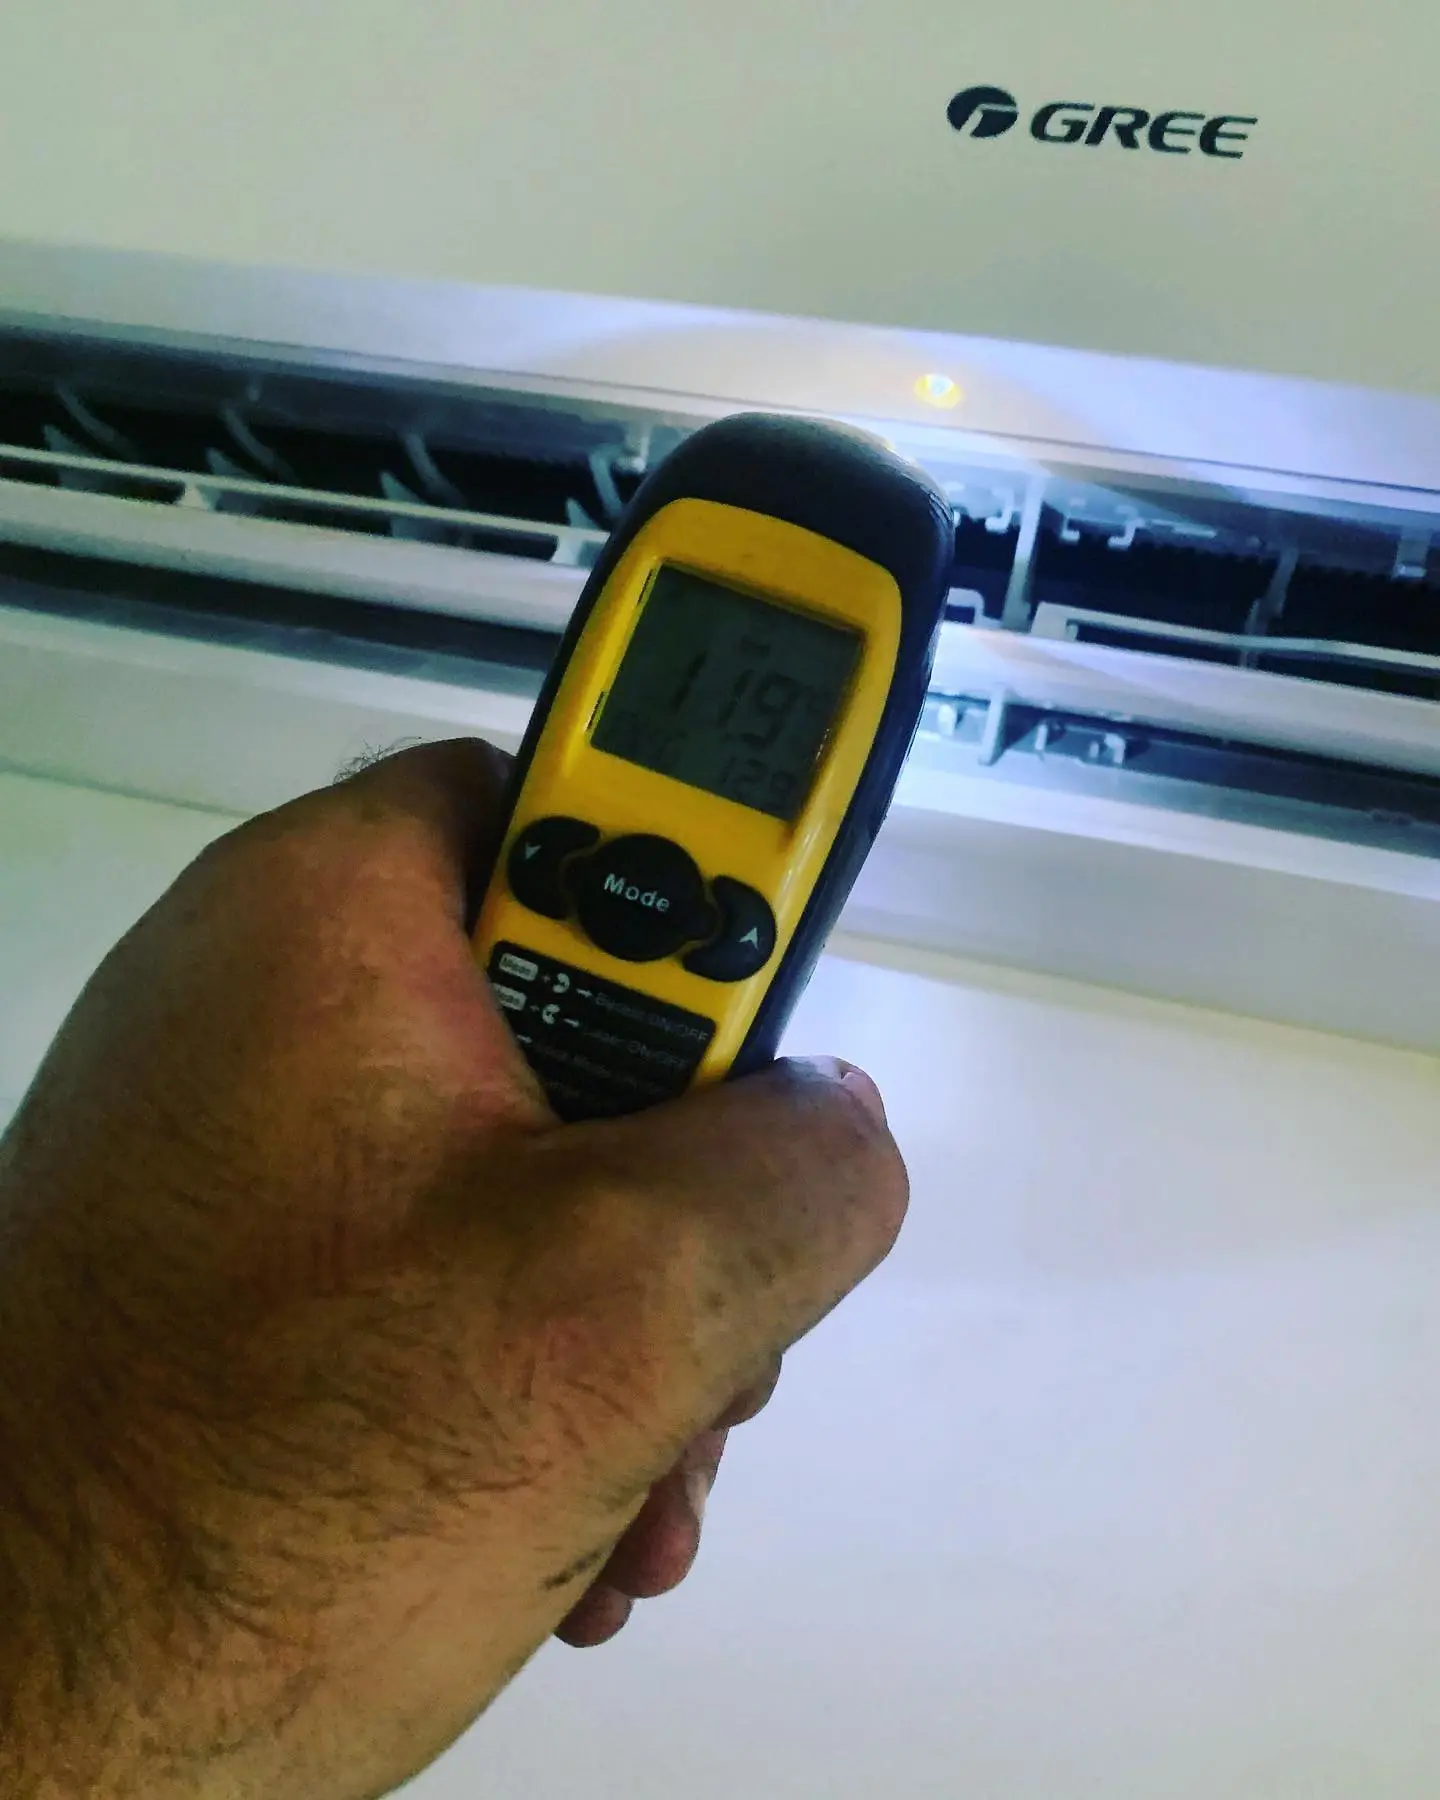 Checking the temperature of a Gree Air Conditioner.